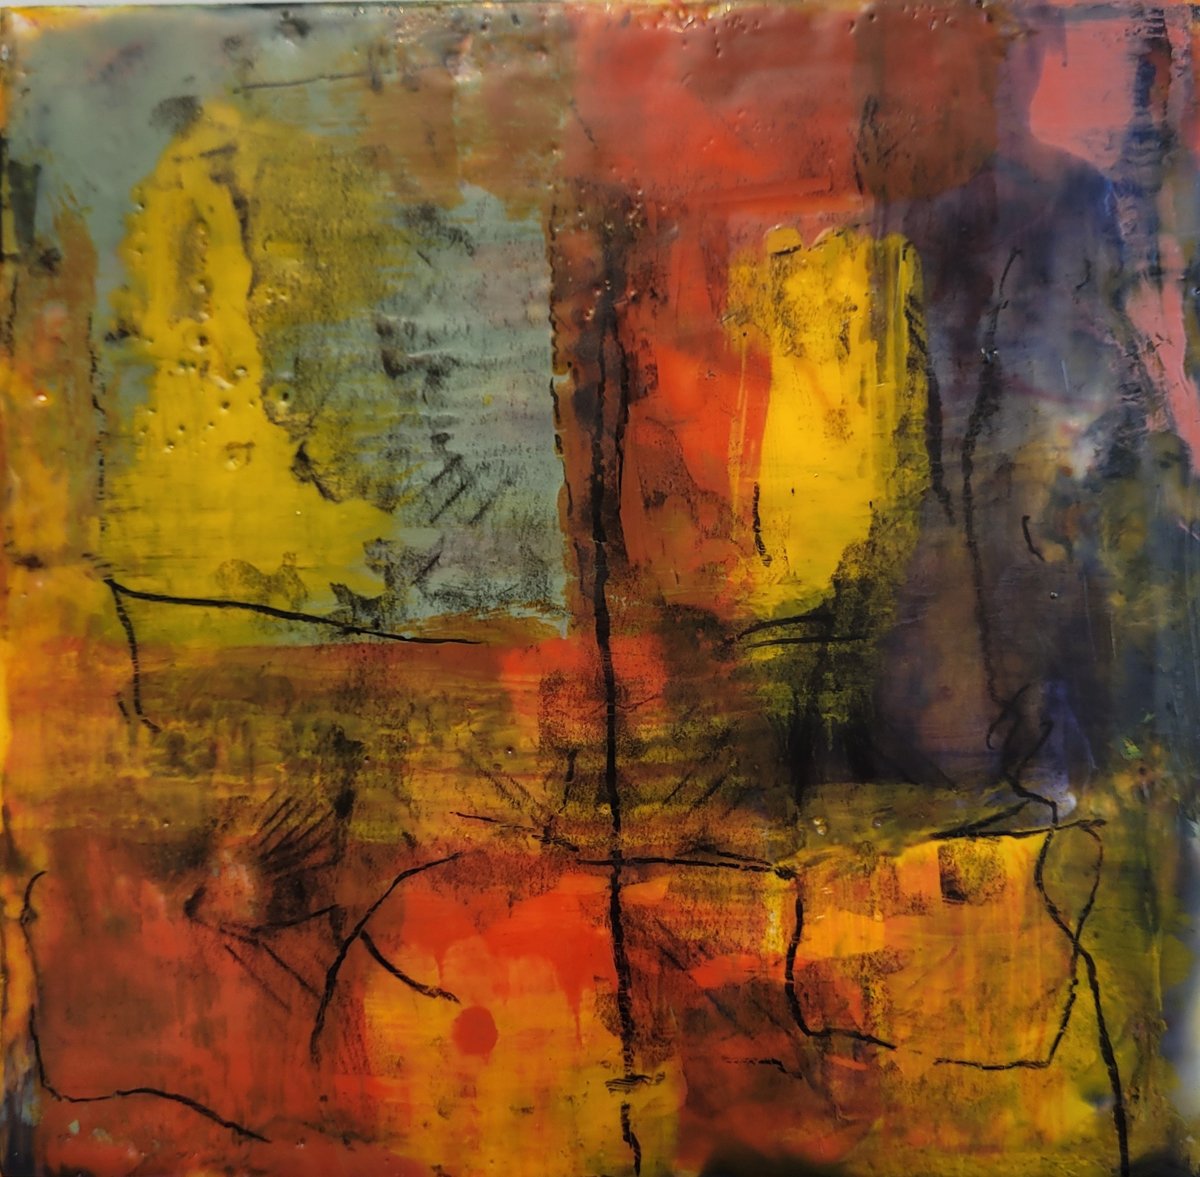   Transitions , encaustic on panel, 8 x 8 in. 